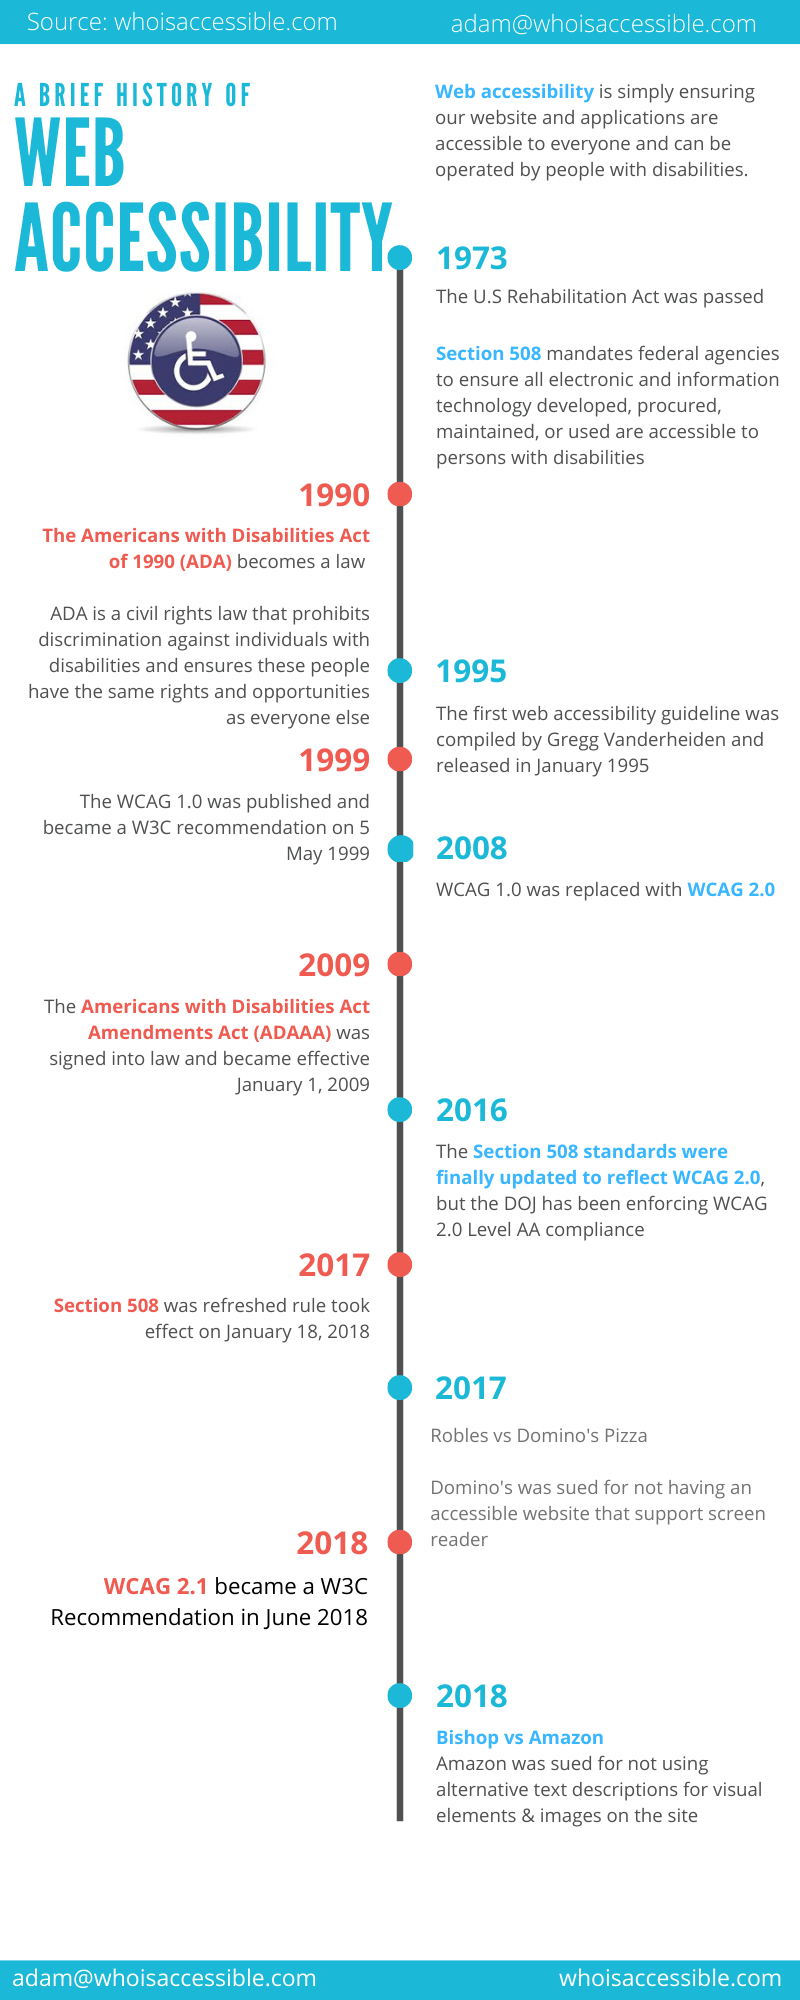 Web Accessibility History Timeline Infographic